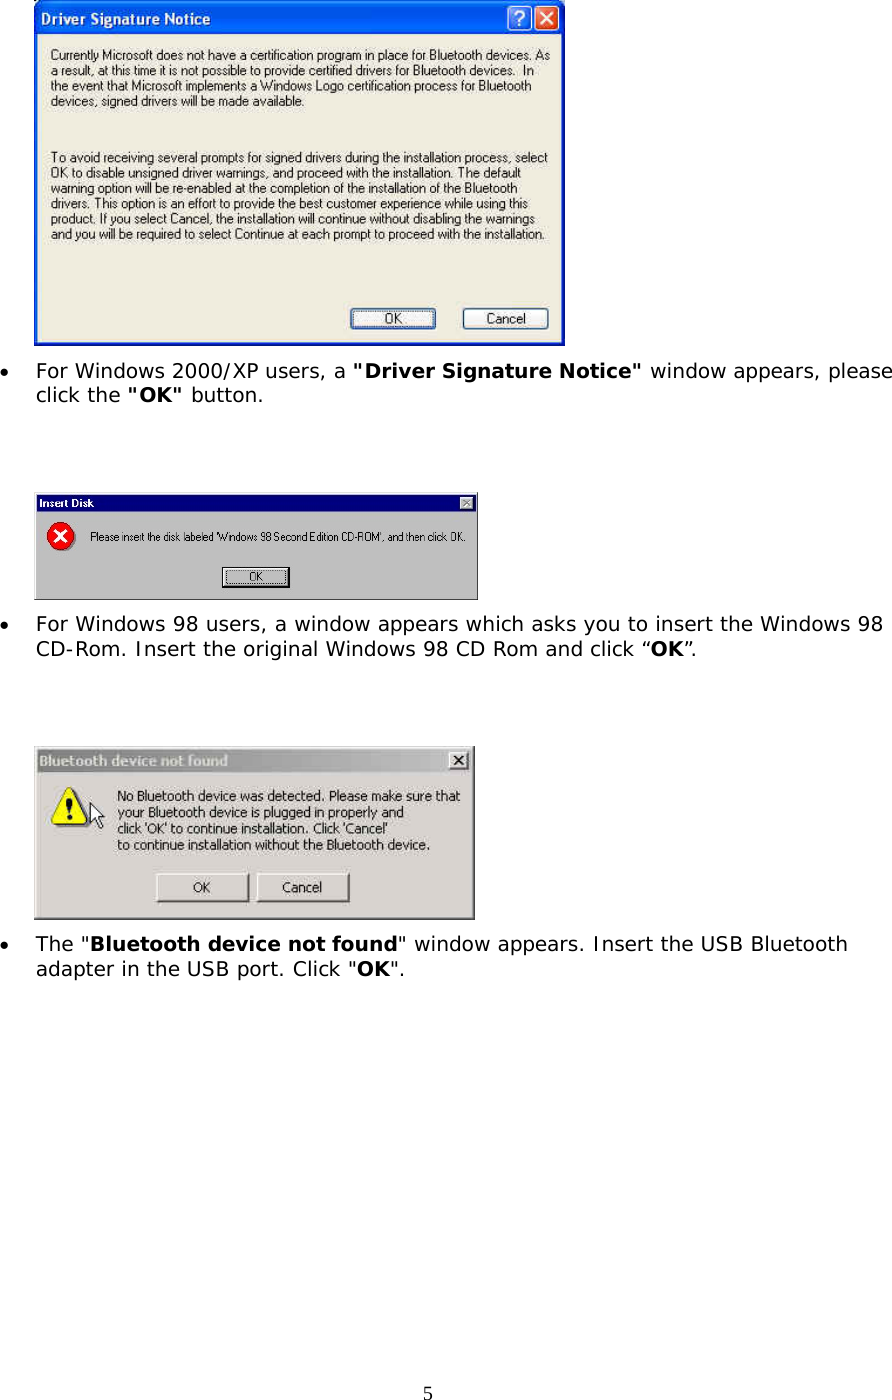 5  •  For Windows 2000/XP users, a &quot;Driver Signature Notice&quot; window appears, please click the &quot;OK&quot; button.      •  For Windows 98 users, a window appears which asks you to insert the Windows 98 CD-Rom. Insert the original Windows 98 CD Rom and click “OK”.    •  The &quot;Bluetooth device not found&quot; window appears. Insert the USB Bluetooth adapter in the USB port. Click &quot;OK&quot;. 